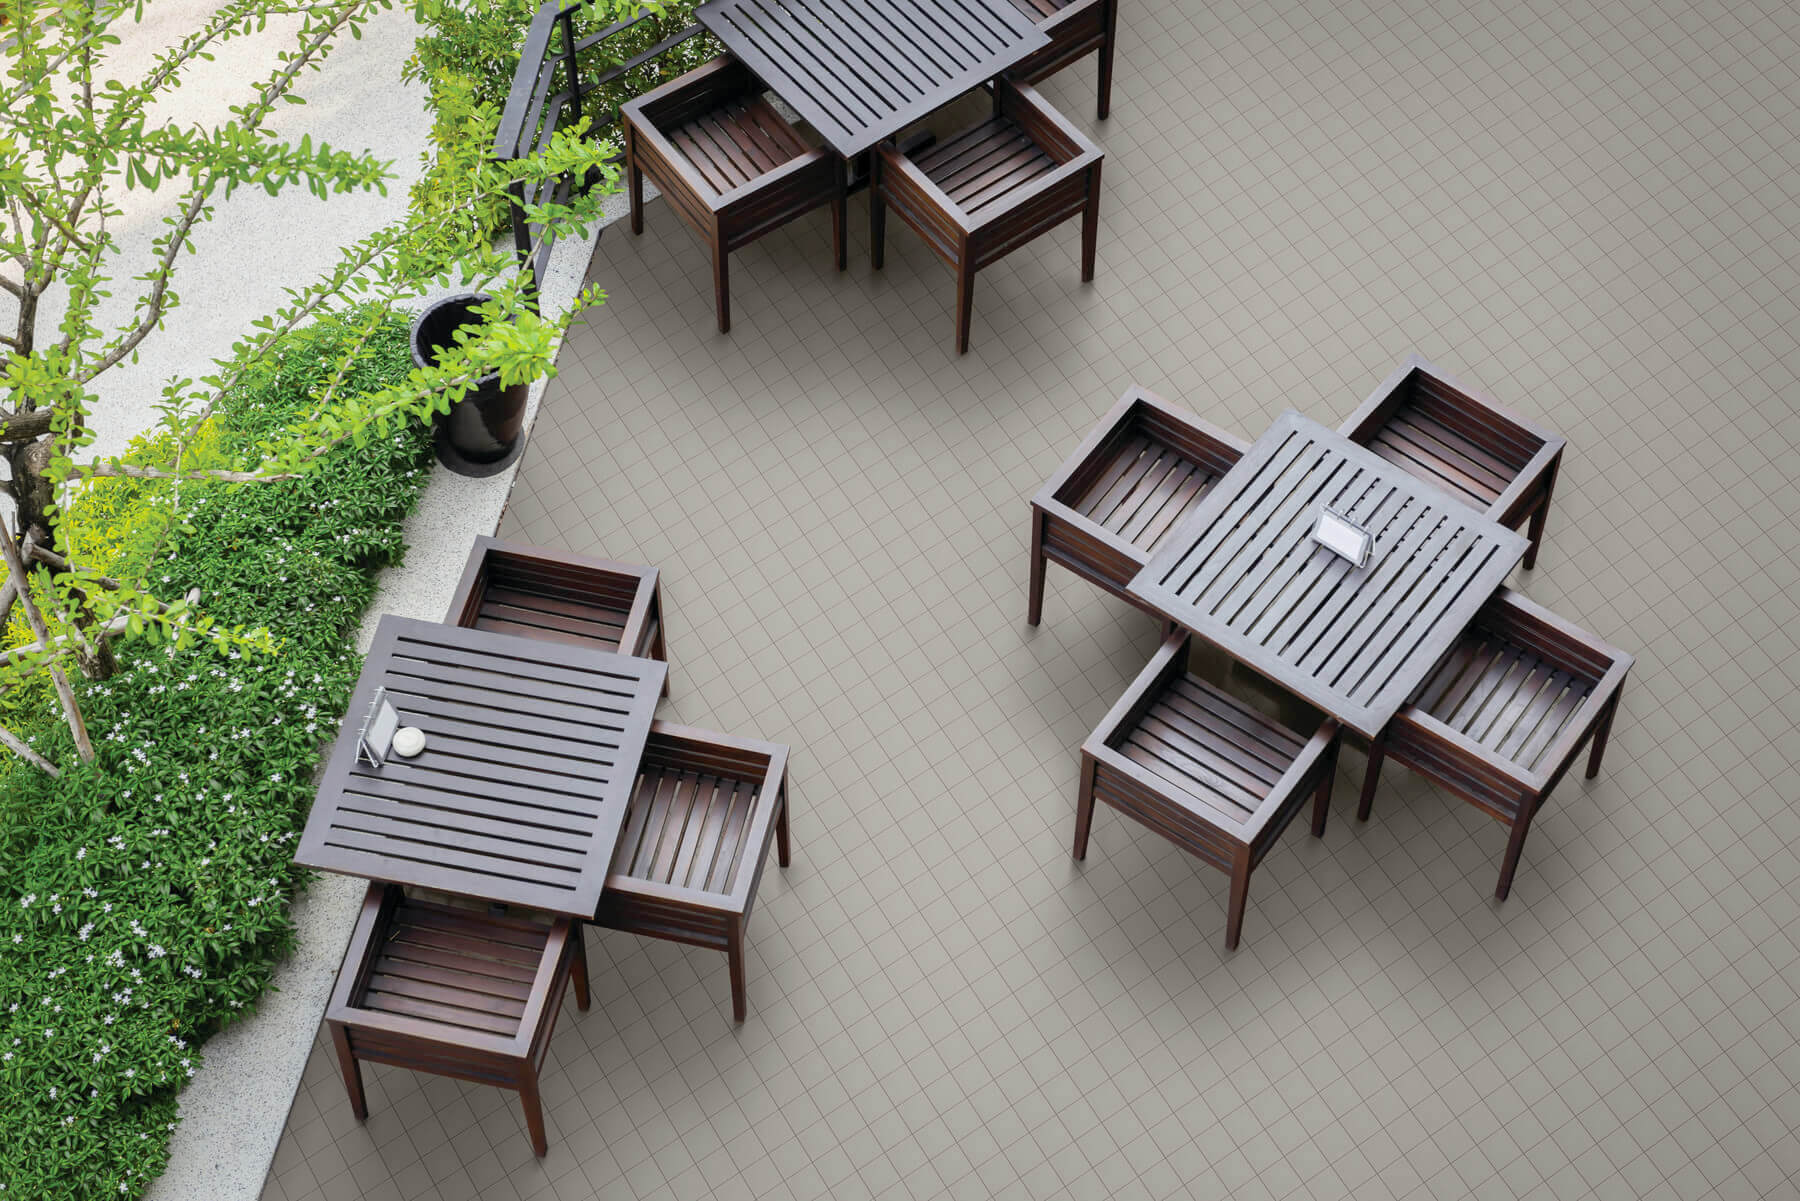 Outdoor furniture with mini grid floor tile pattern